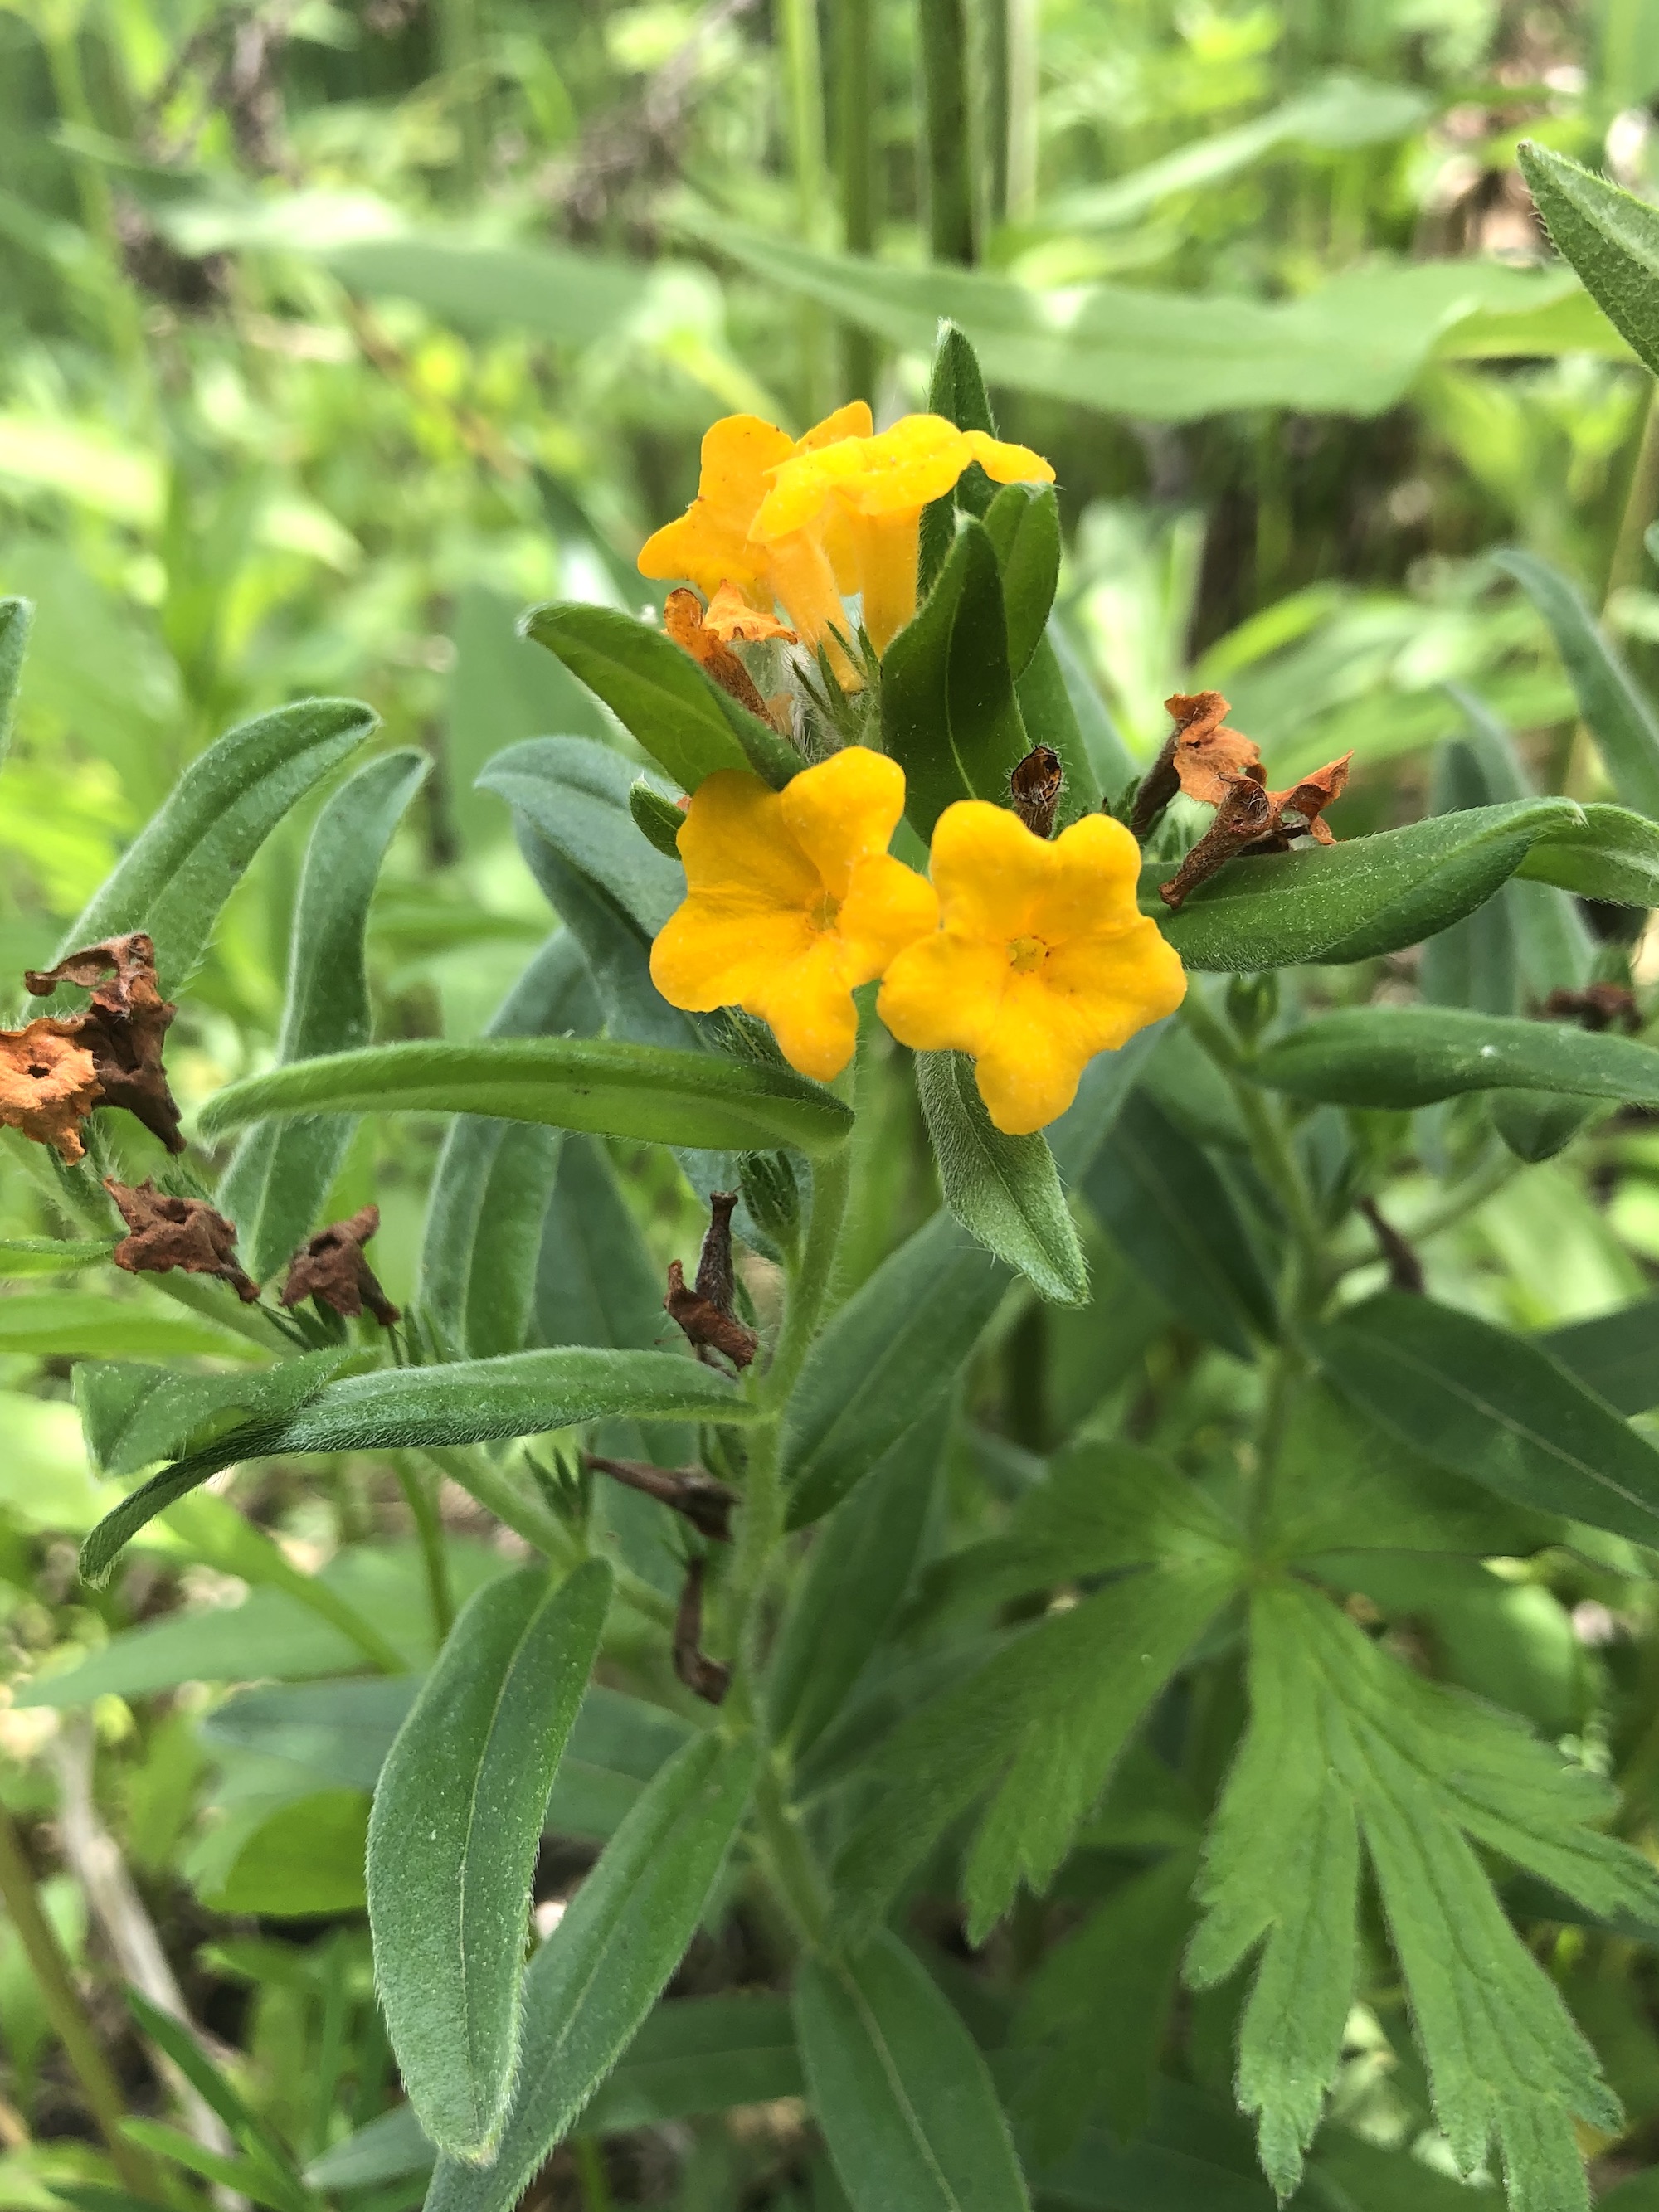 Hoary Puccoon in the Curtis Prairie in the University of Wisconsin-Madison Arboretum in Madison, Wisconsin on May 30, 2022.